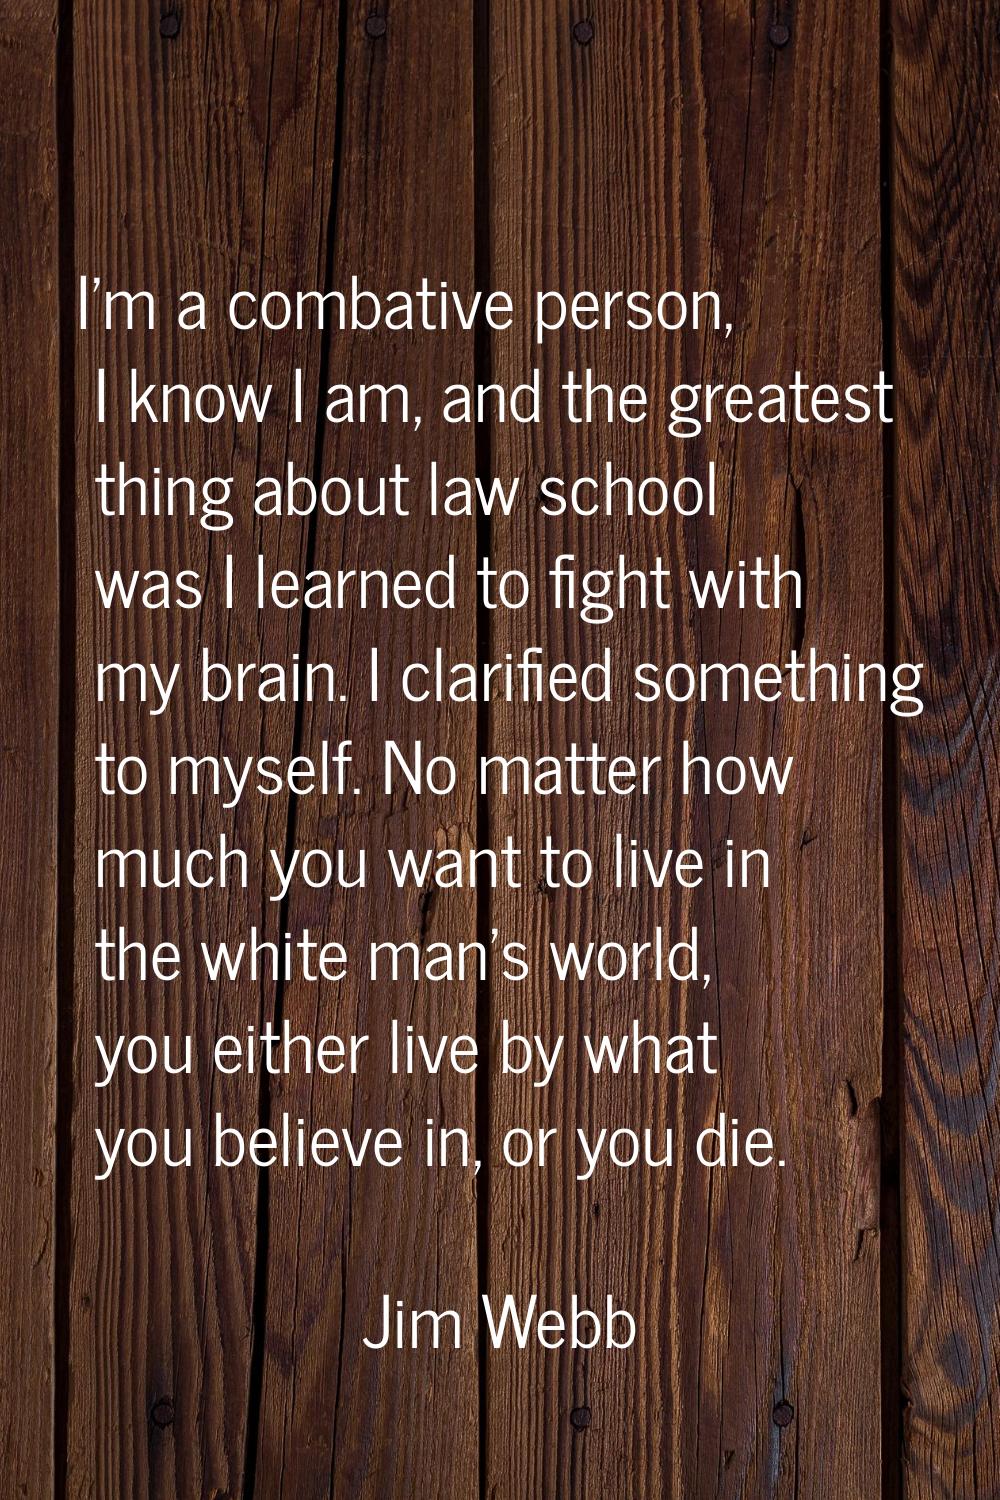 I'm a combative person, I know I am, and the greatest thing about law school was I learned to fight